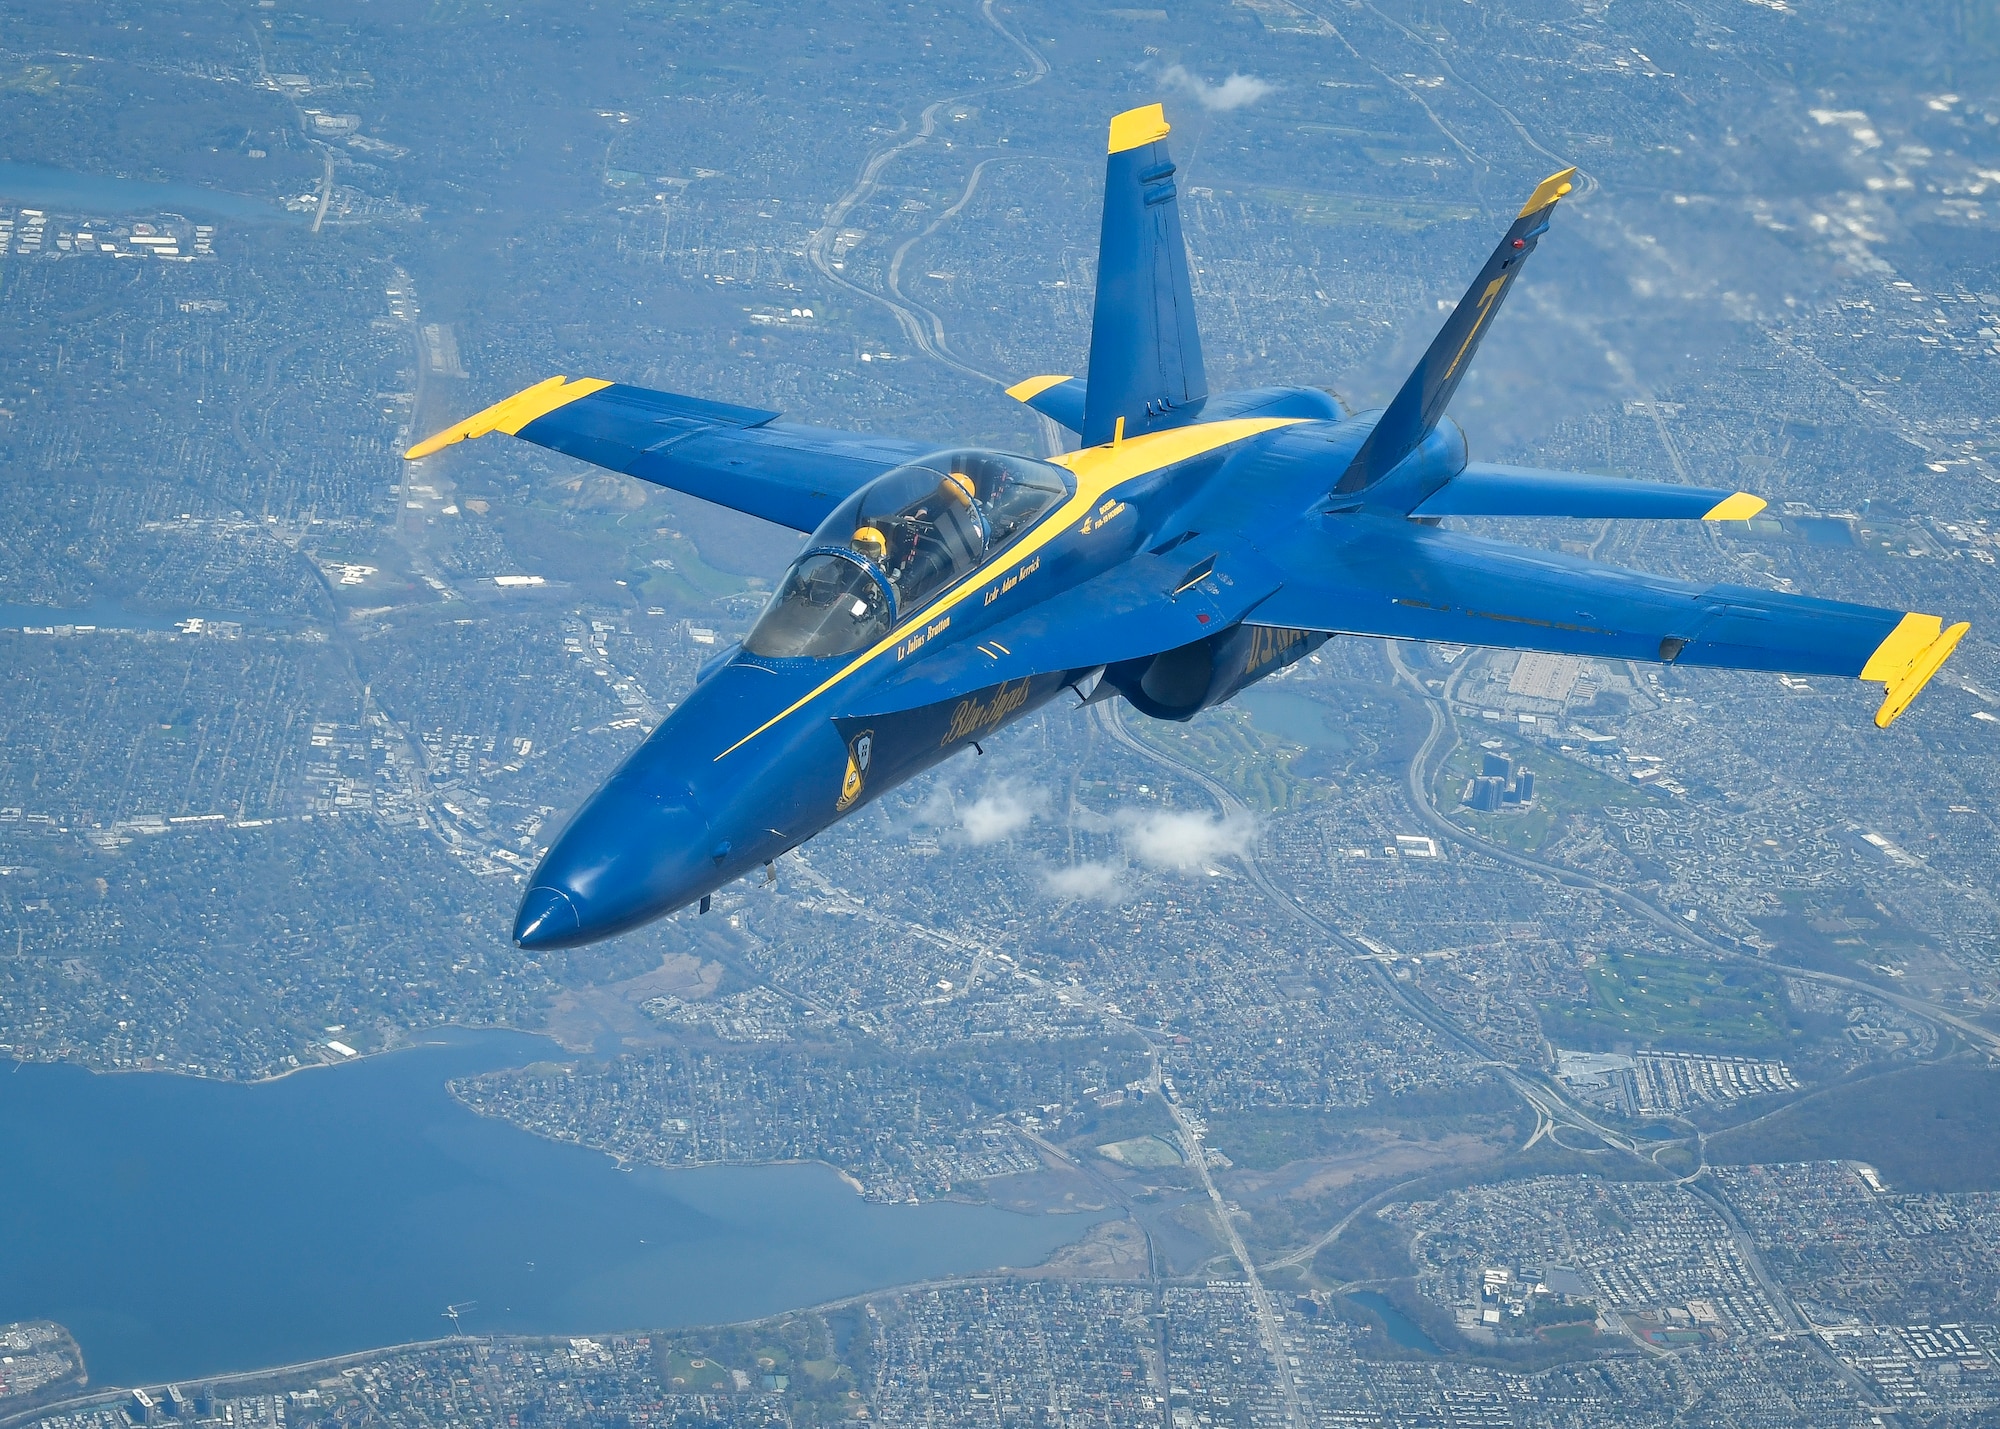 An F/A-18 Hornet assigned to the U.S. Navy Flight Blue Angels approaches a KC-10 Extender assigned to the 305th Air Mobility Squadron from Joint Base McGuire-Dix-Lakehurst, N.J., April 28, 2020. The Blue Angels conducted a joint flyover with the U.S. Air Force Thunderbirds as part of America Strong, an effort to honor healthcare workers, first responders and other essential personnel who are working on the front lines to combat COVID-19. (U.S. Air Force photo by Staff Sgt. Jake Carter)